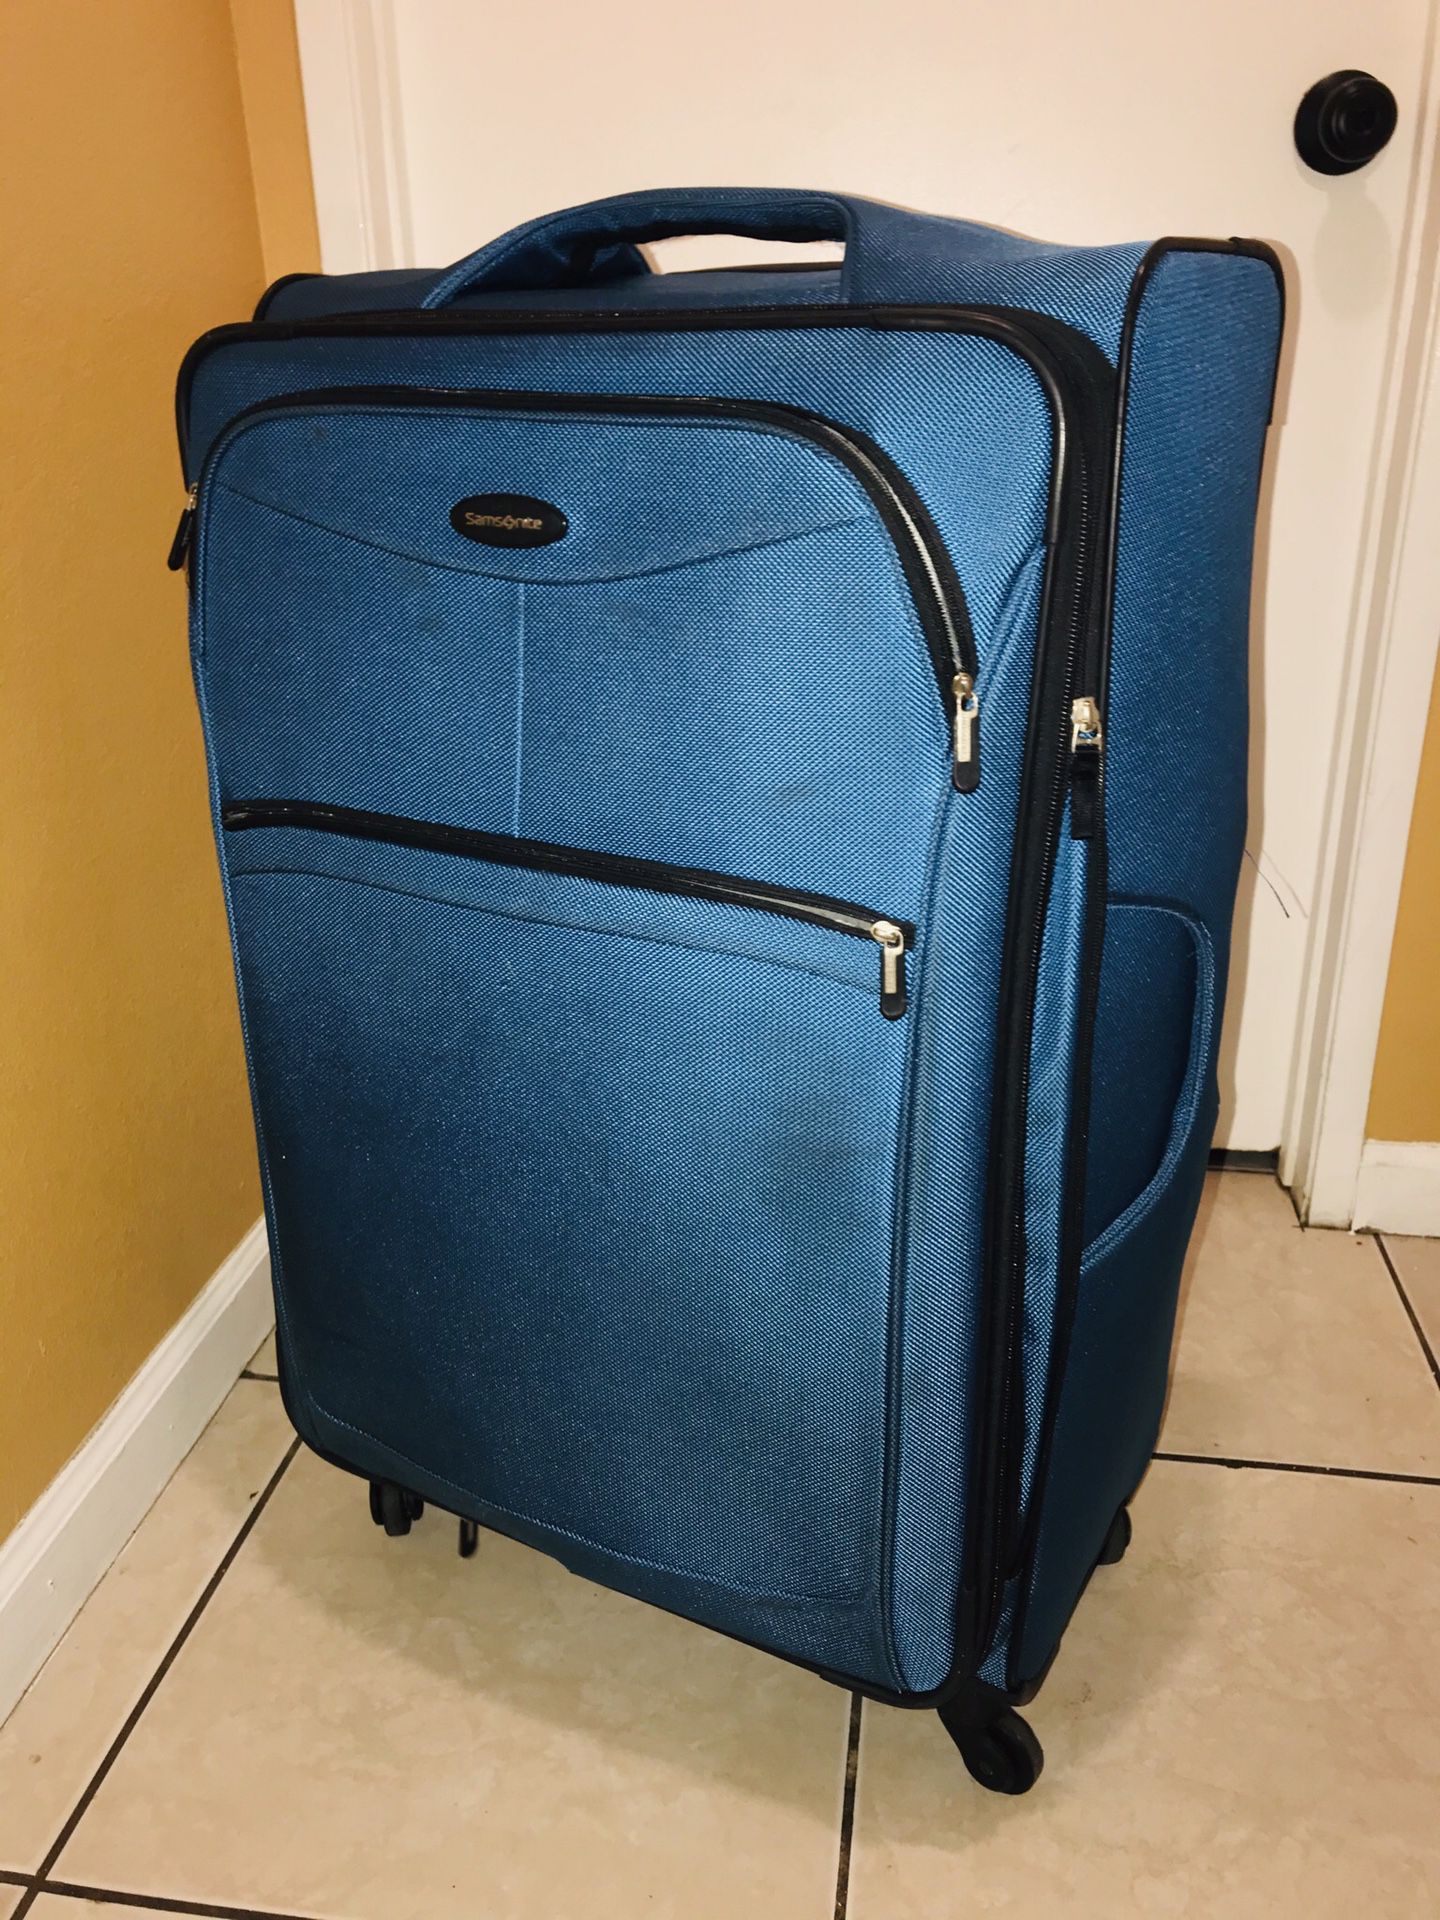 Luggage - 30" Navy Longport Upright Spinner Samsonite . Used still on perfect condition